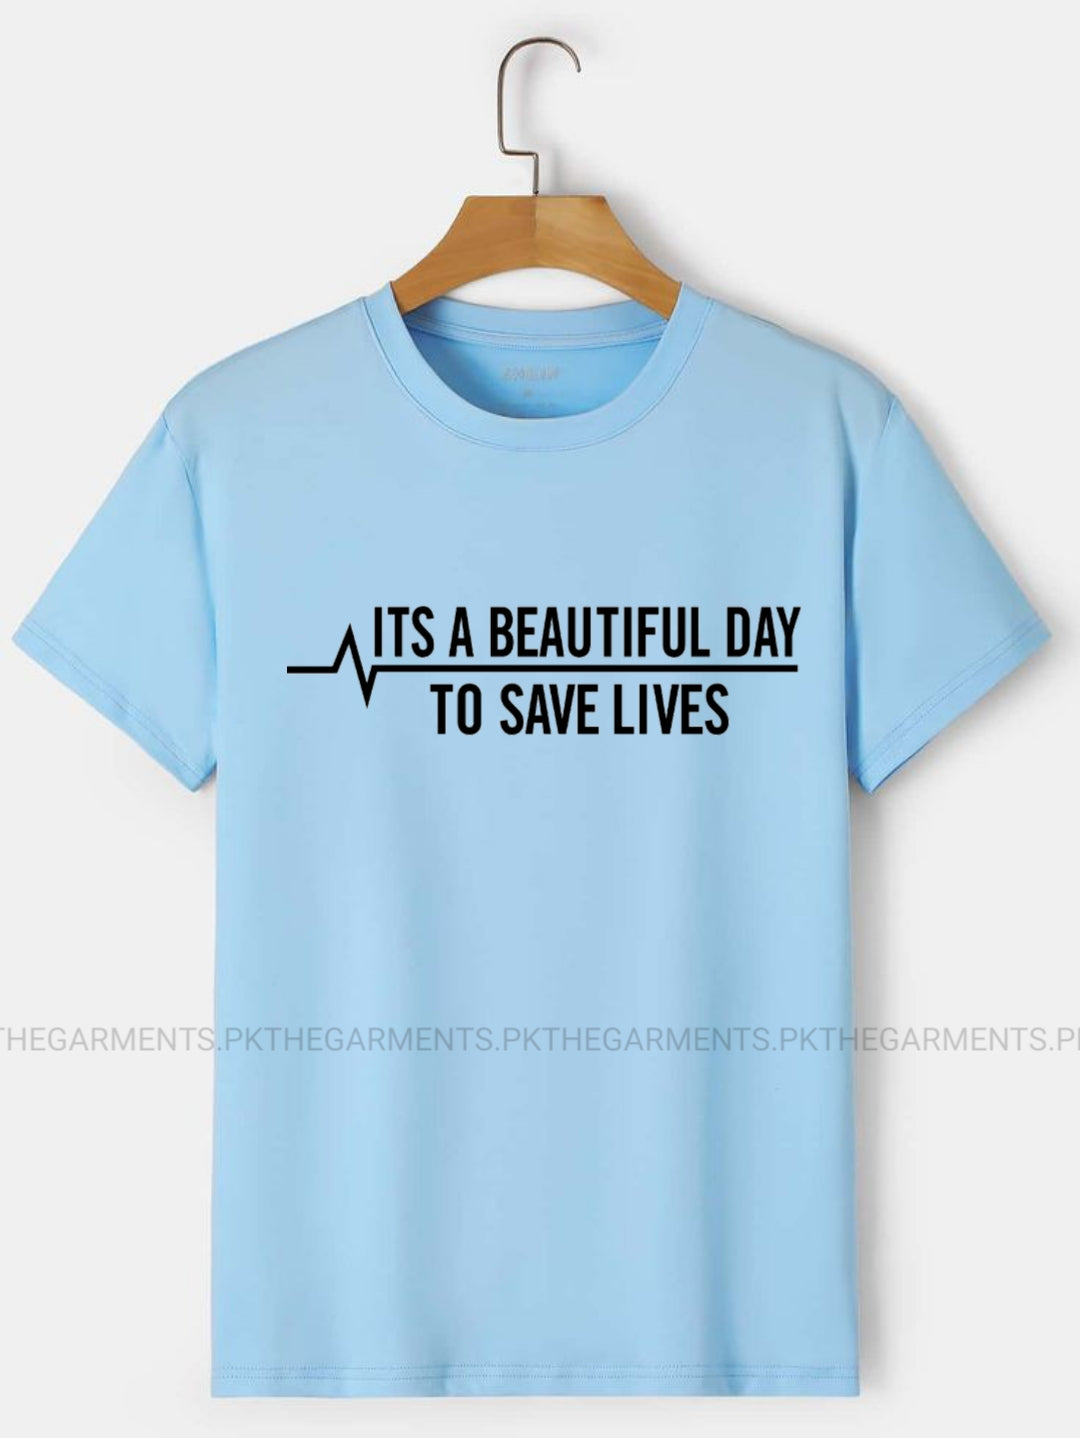 SKY BLUE TSHIRT ( ITS A BEAUTIFUL DAY TO SAVE LIVES)